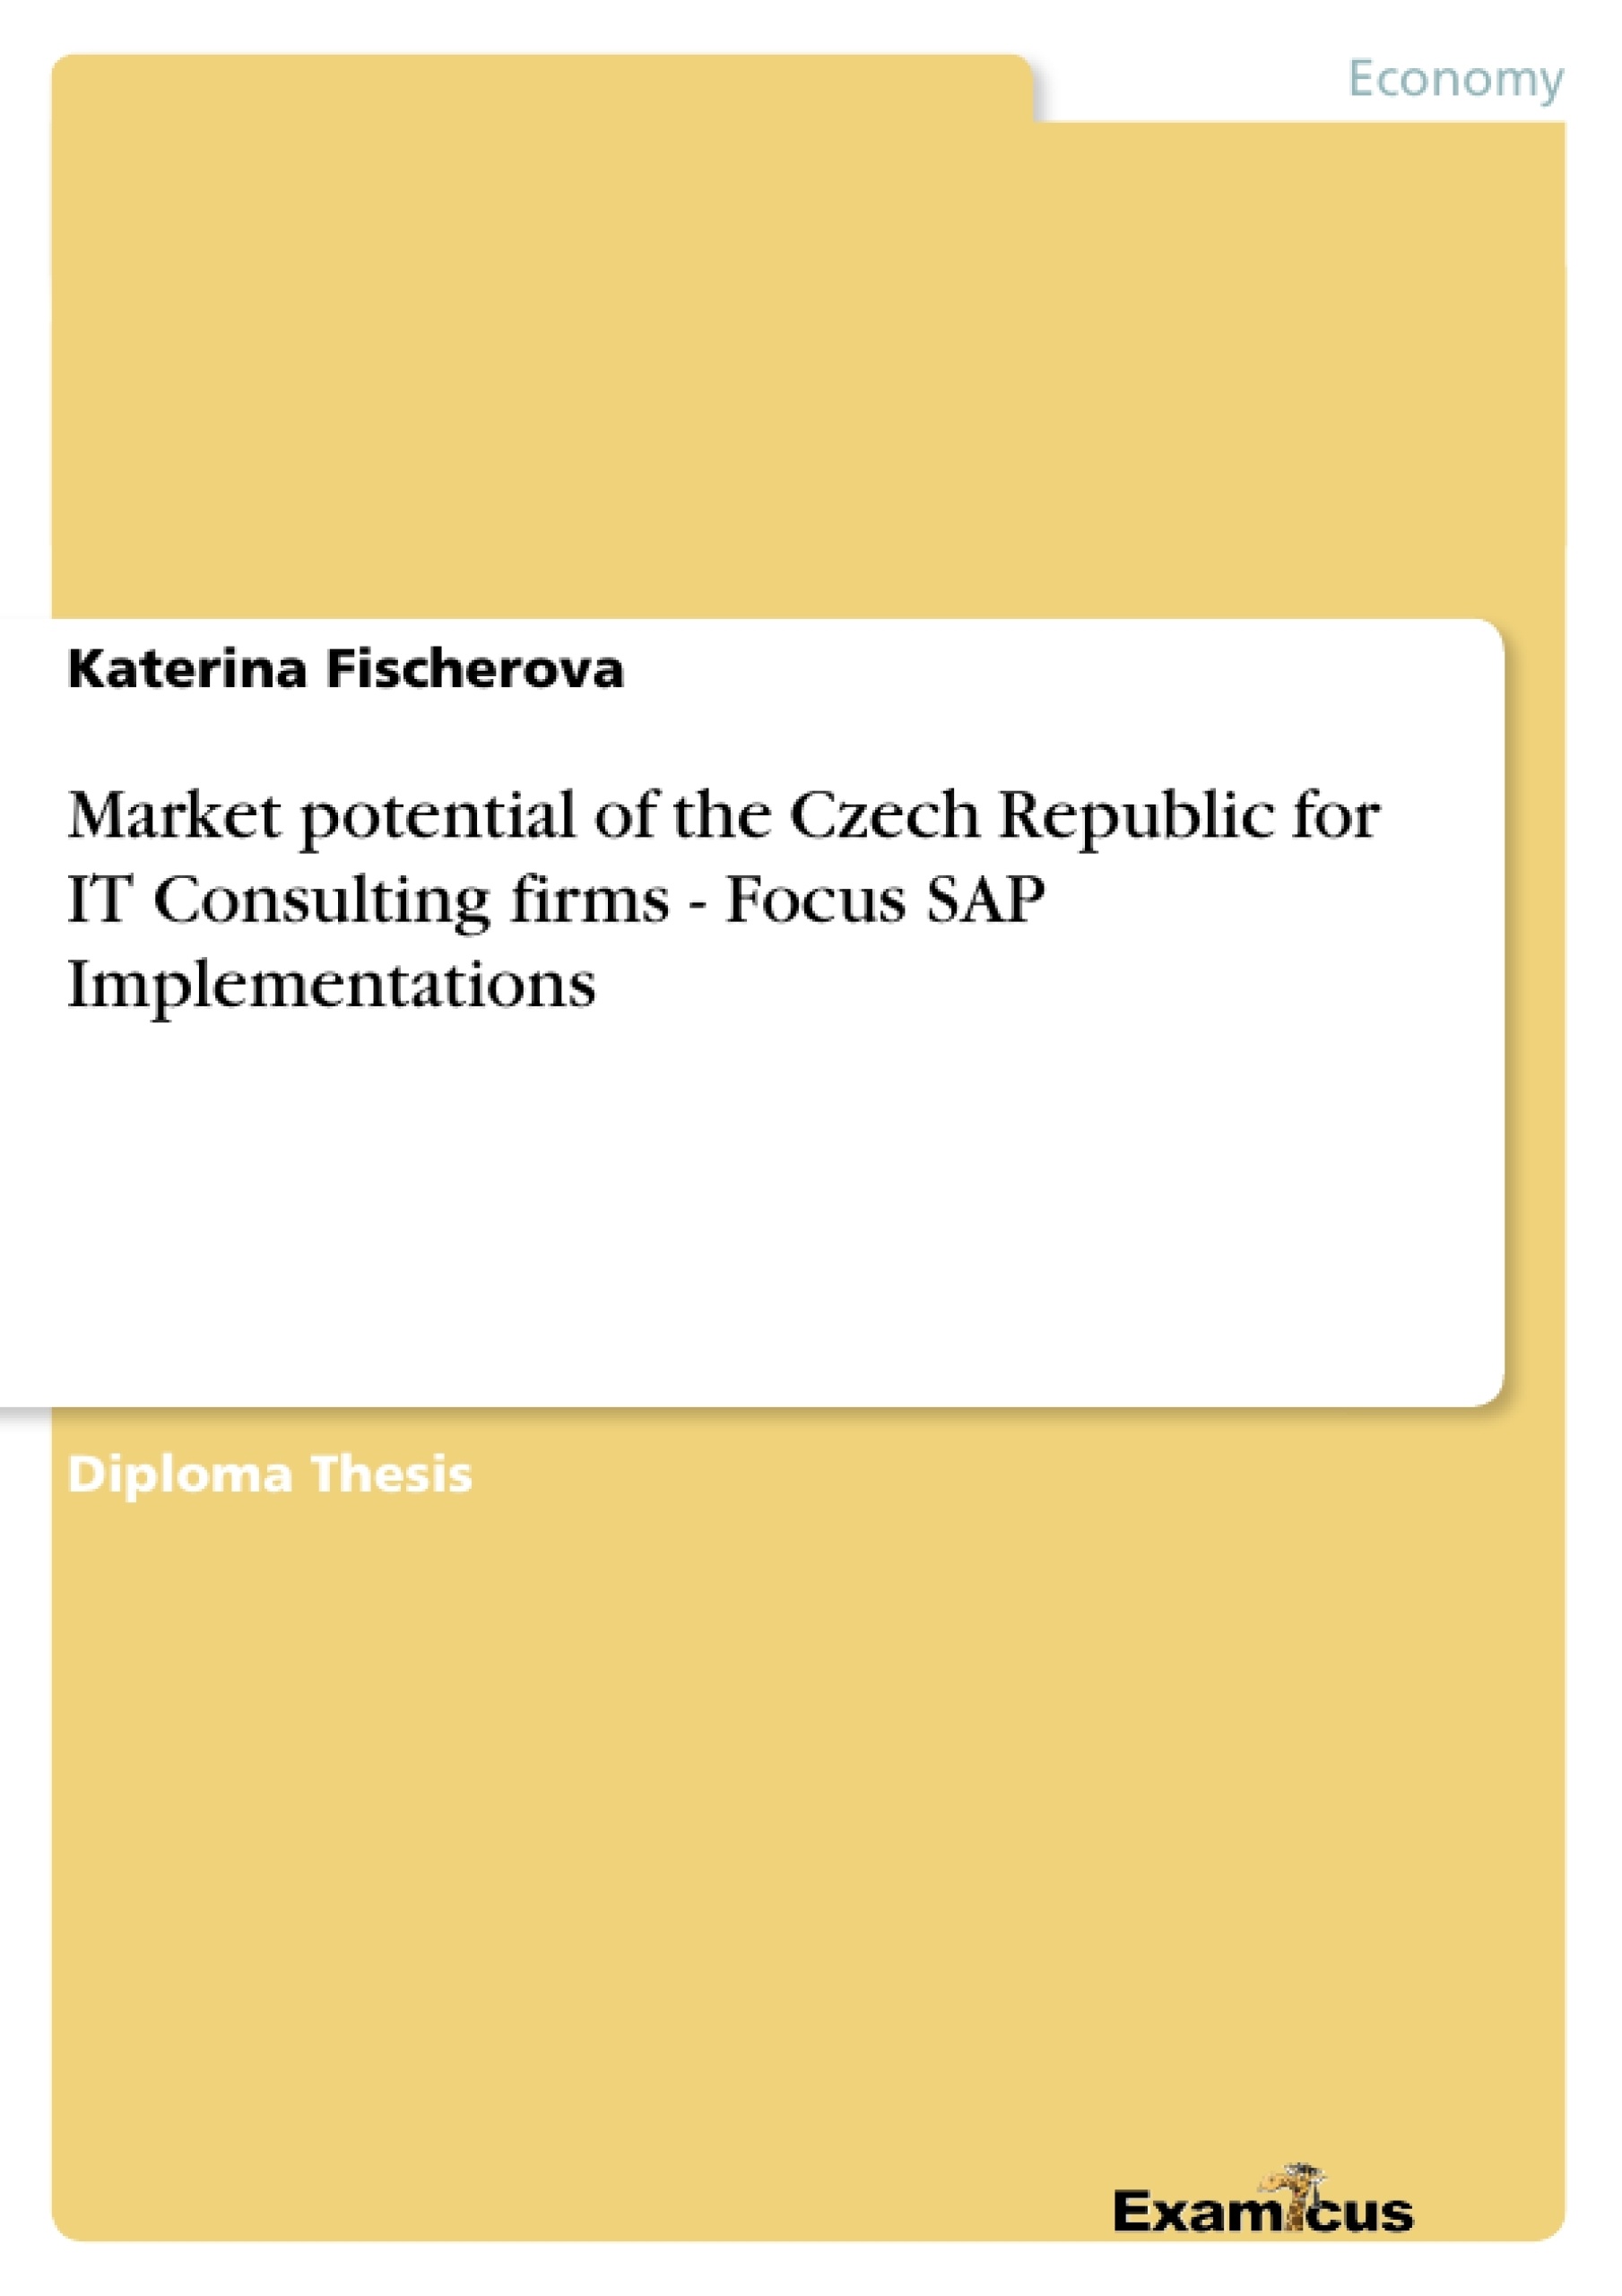 Titre: Market potential of the Czech Republic for IT Consulting firms 	- Focus SAP Implementations